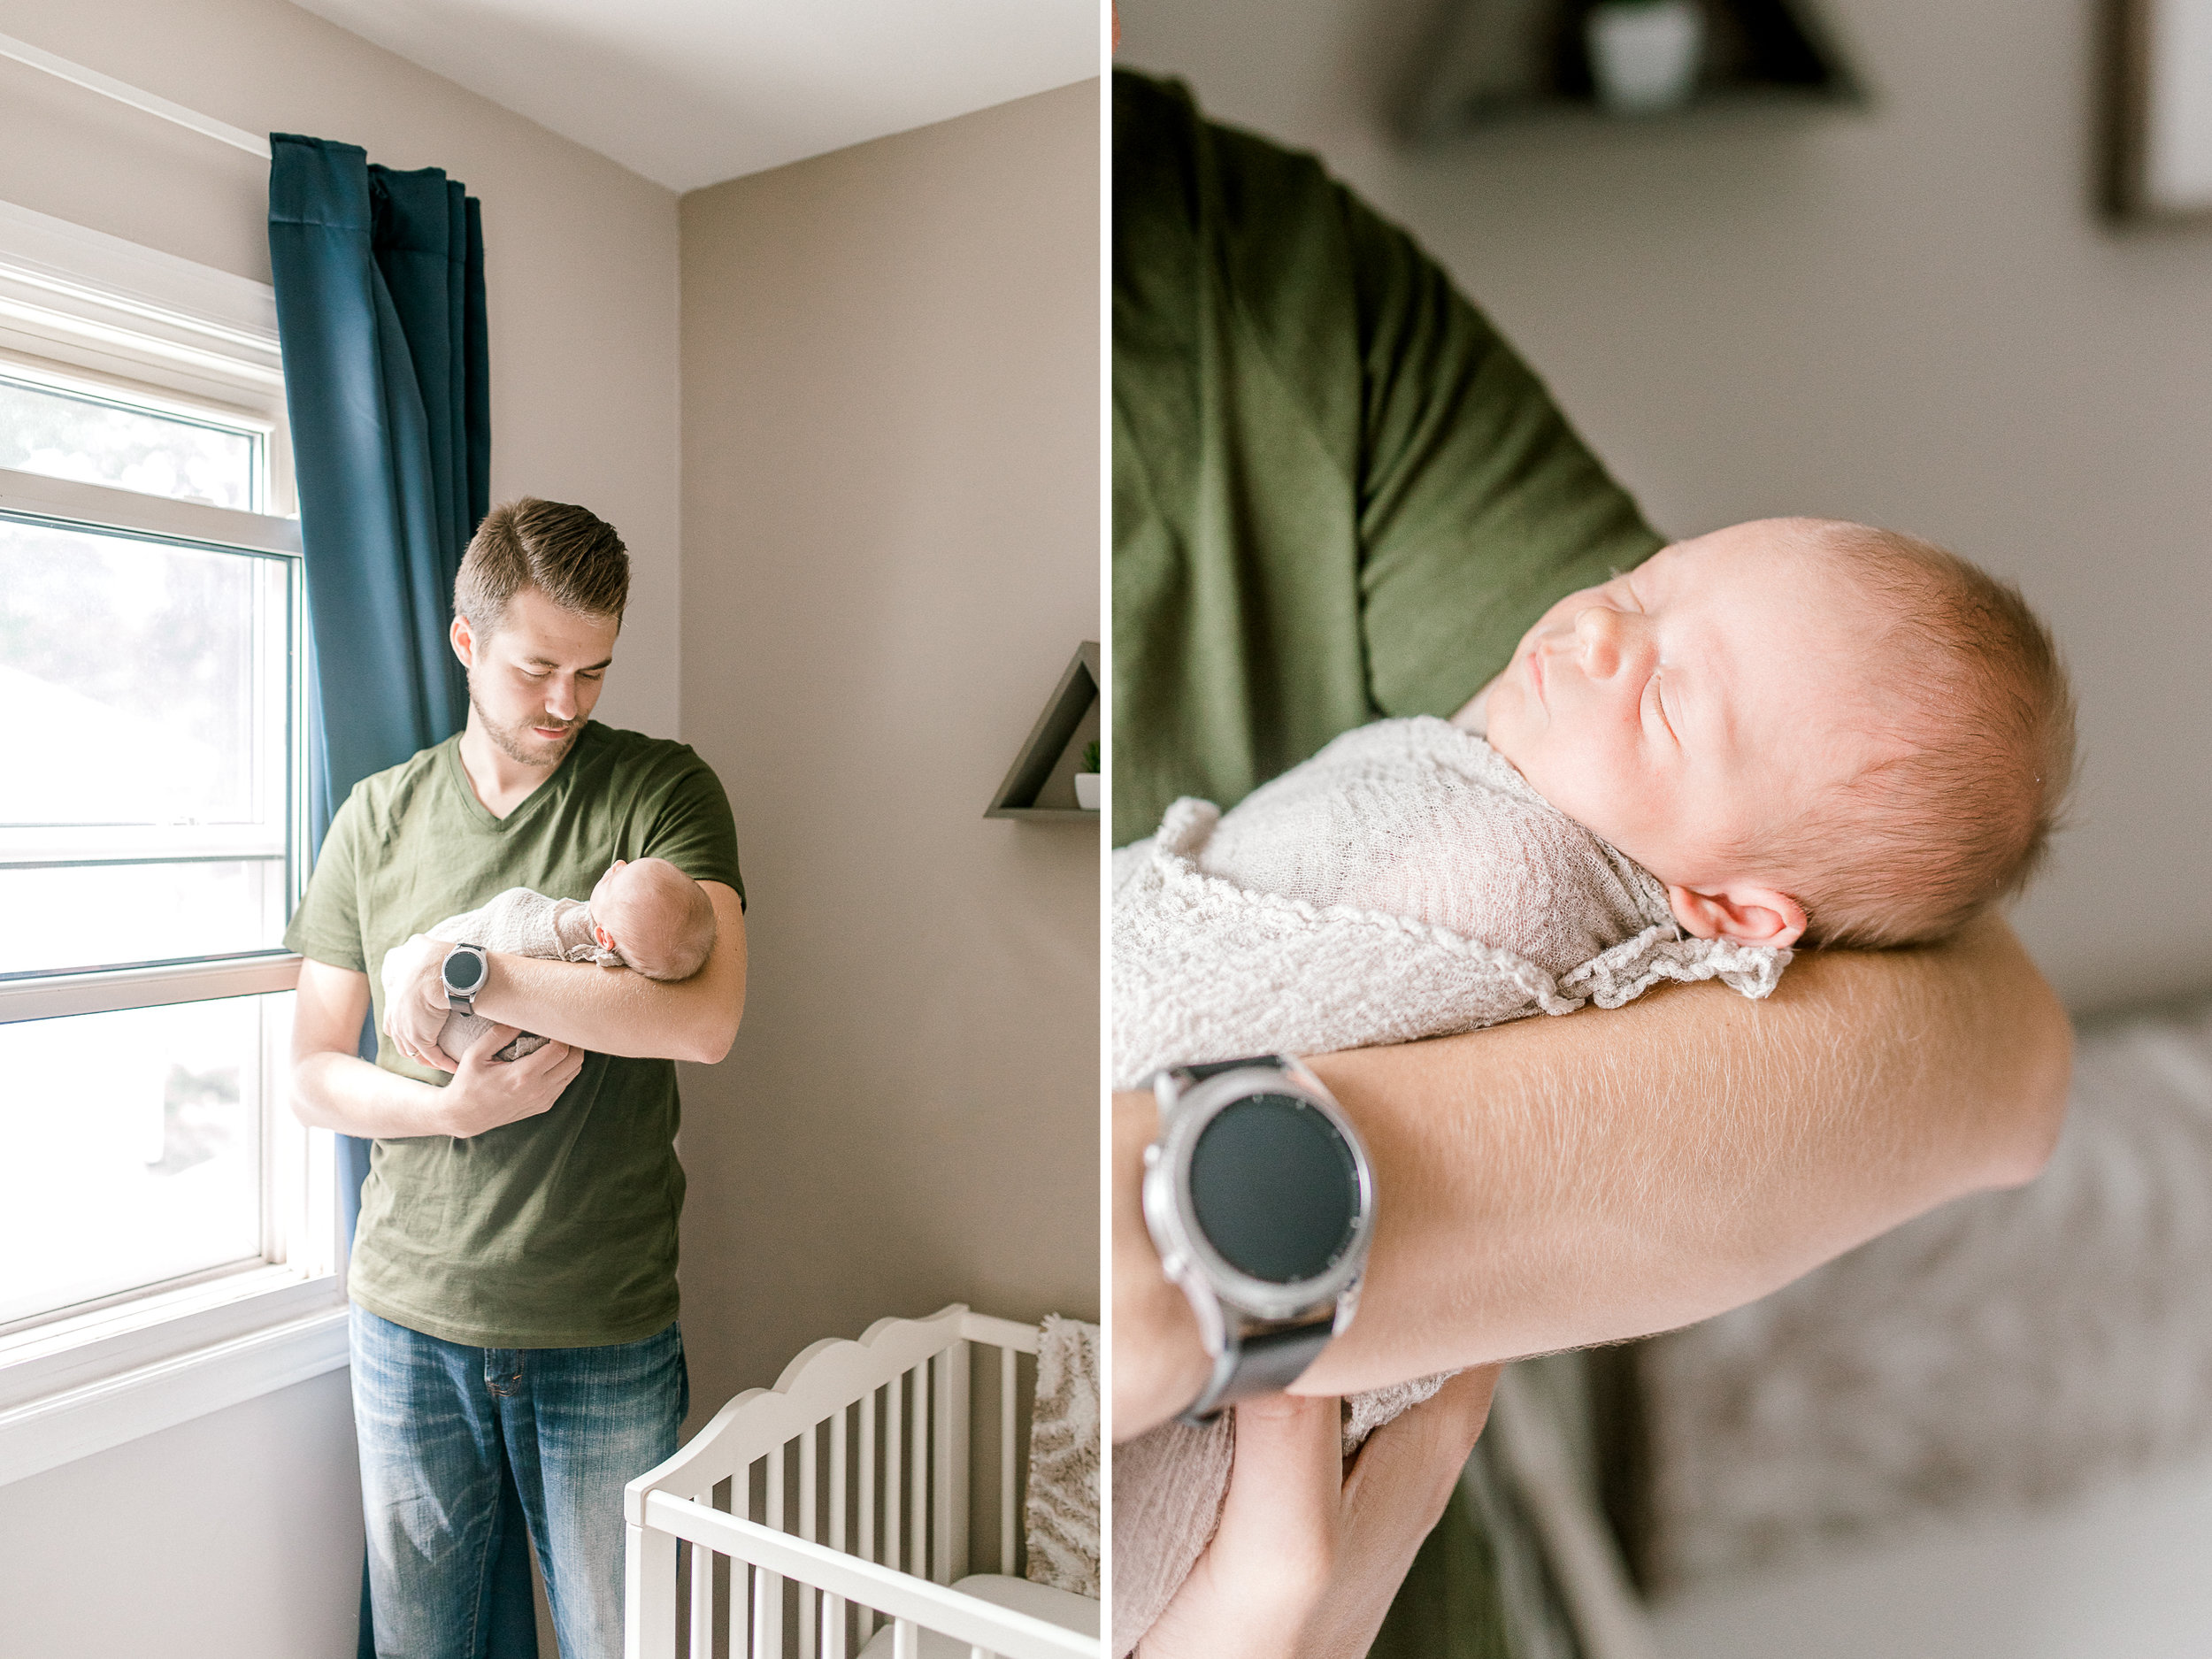 In-home newborn lifestyle family session | Michigan Lifestyle Photographer | Laurenda Marie Photography